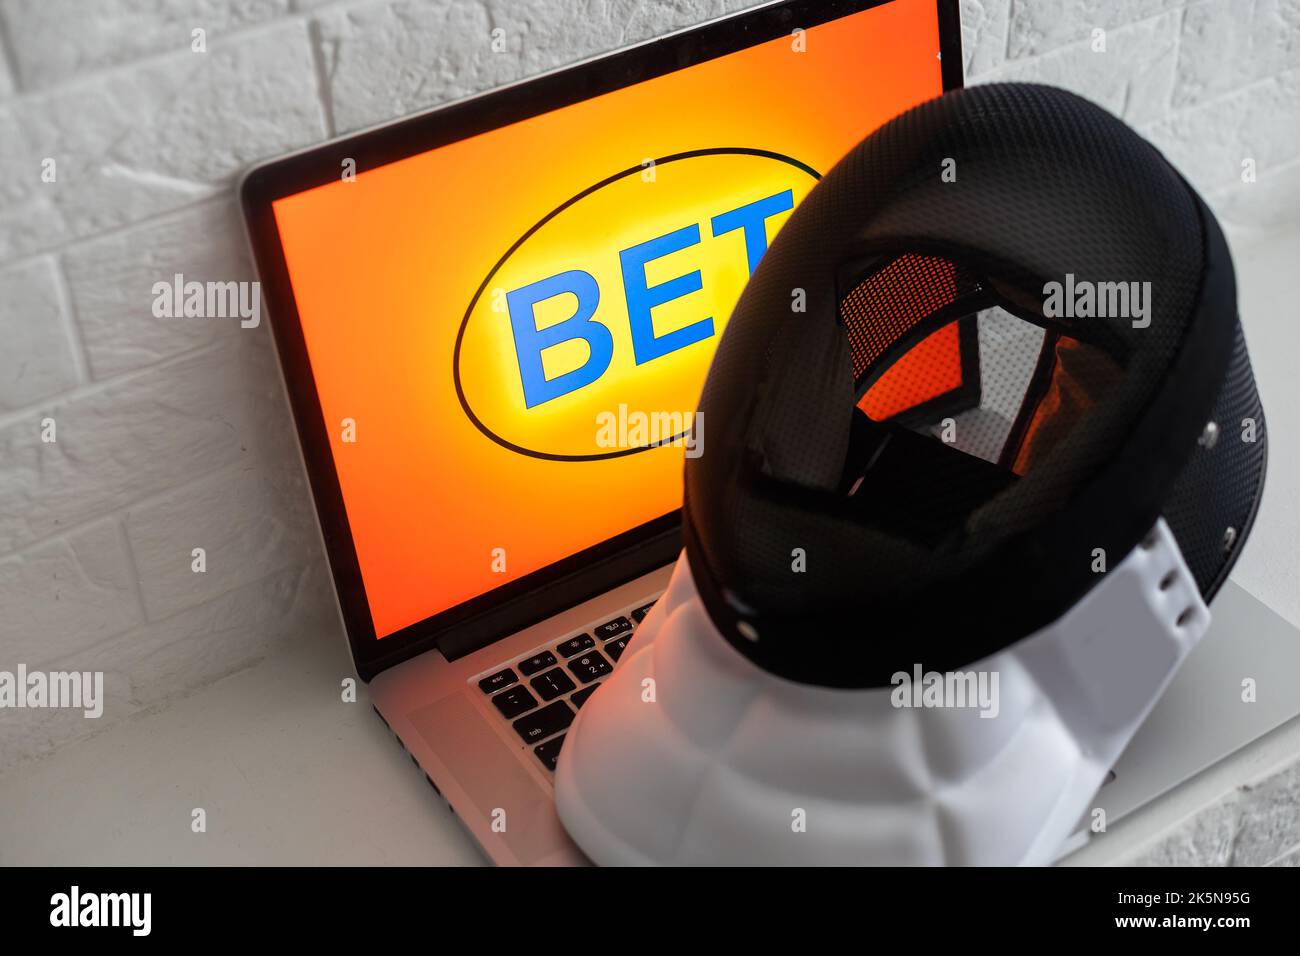 Bookmaker, fencing, sports betting on a laptop Stock Photo